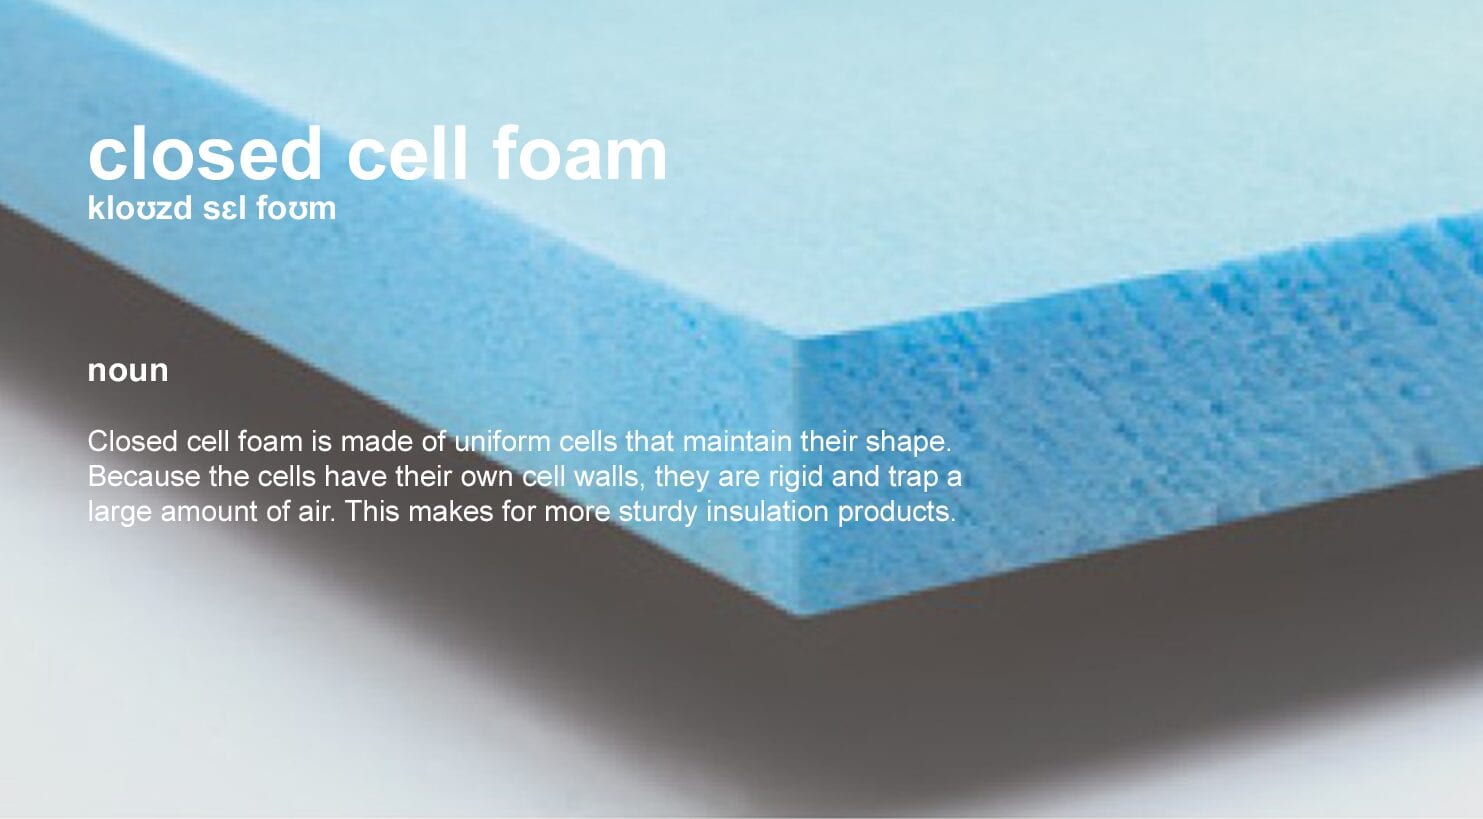 does closed cell foam absorb water